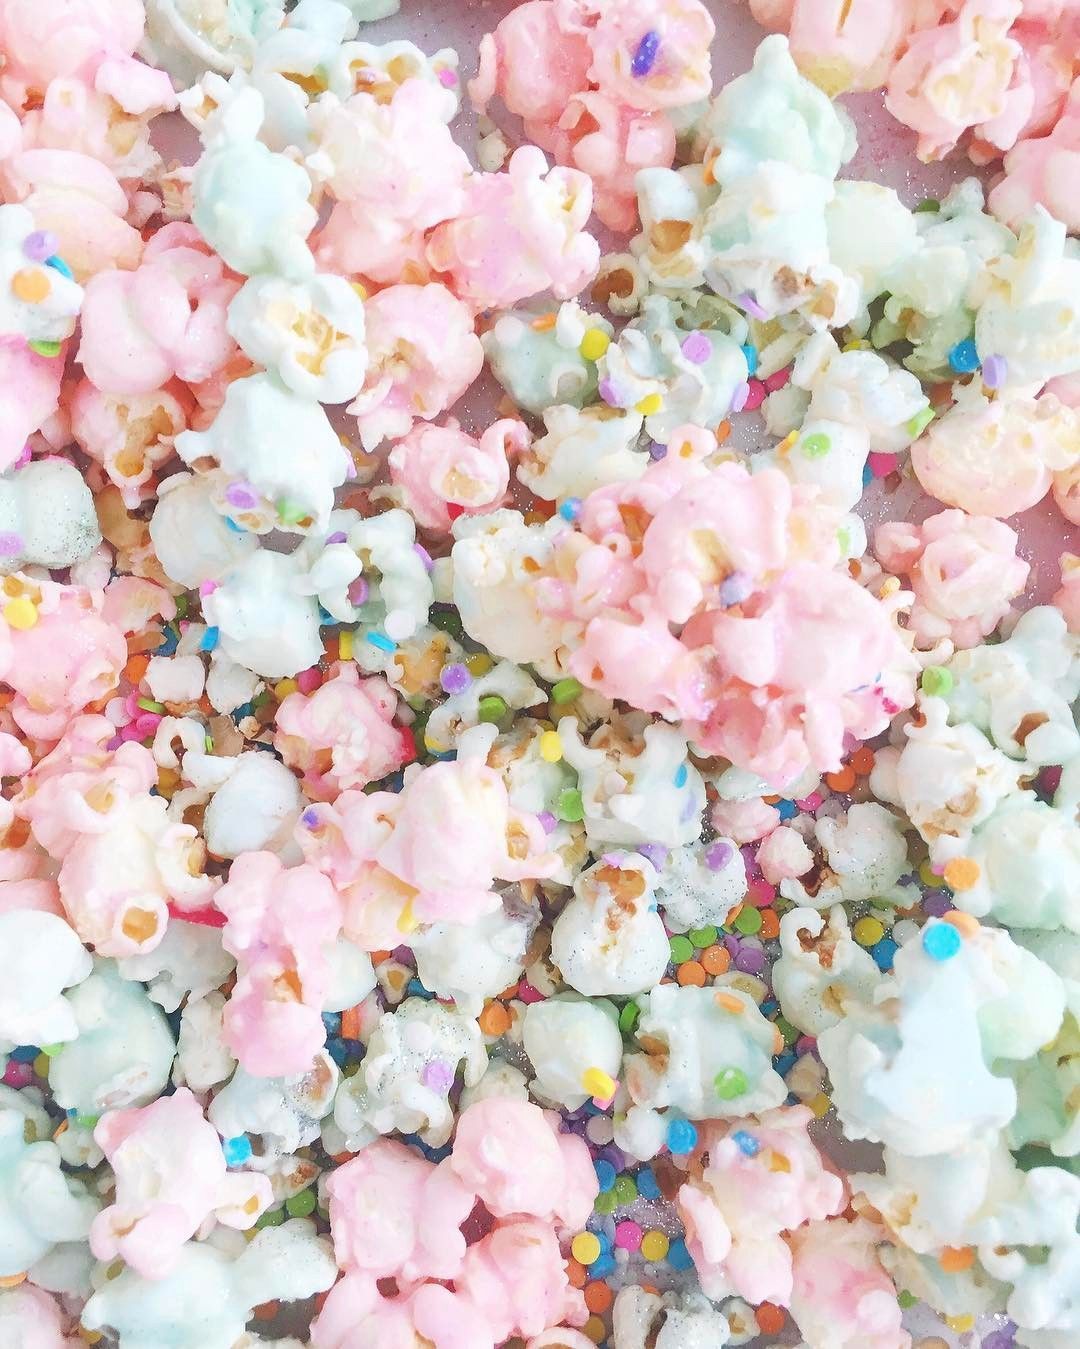 A close up of popcorn with sprinkles and candy - Popcorn